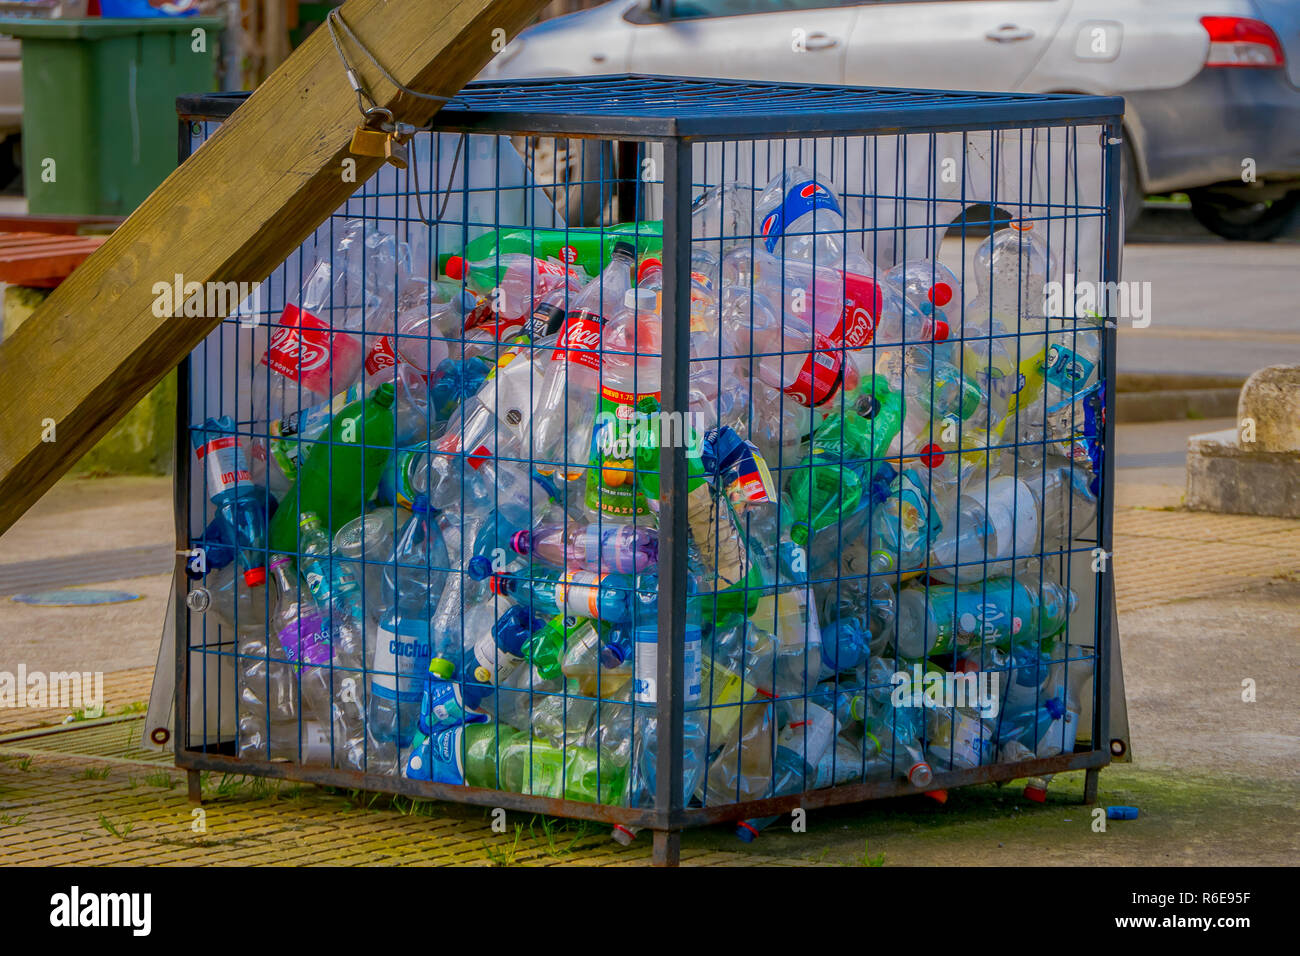 CHILOE, CHILE - SEPTEMBER, 27, 2018: Outdoor view of metallic box with some plastic botlles inside, recycling concept, ecological friendly city located on Lemuy Island Stock Photo